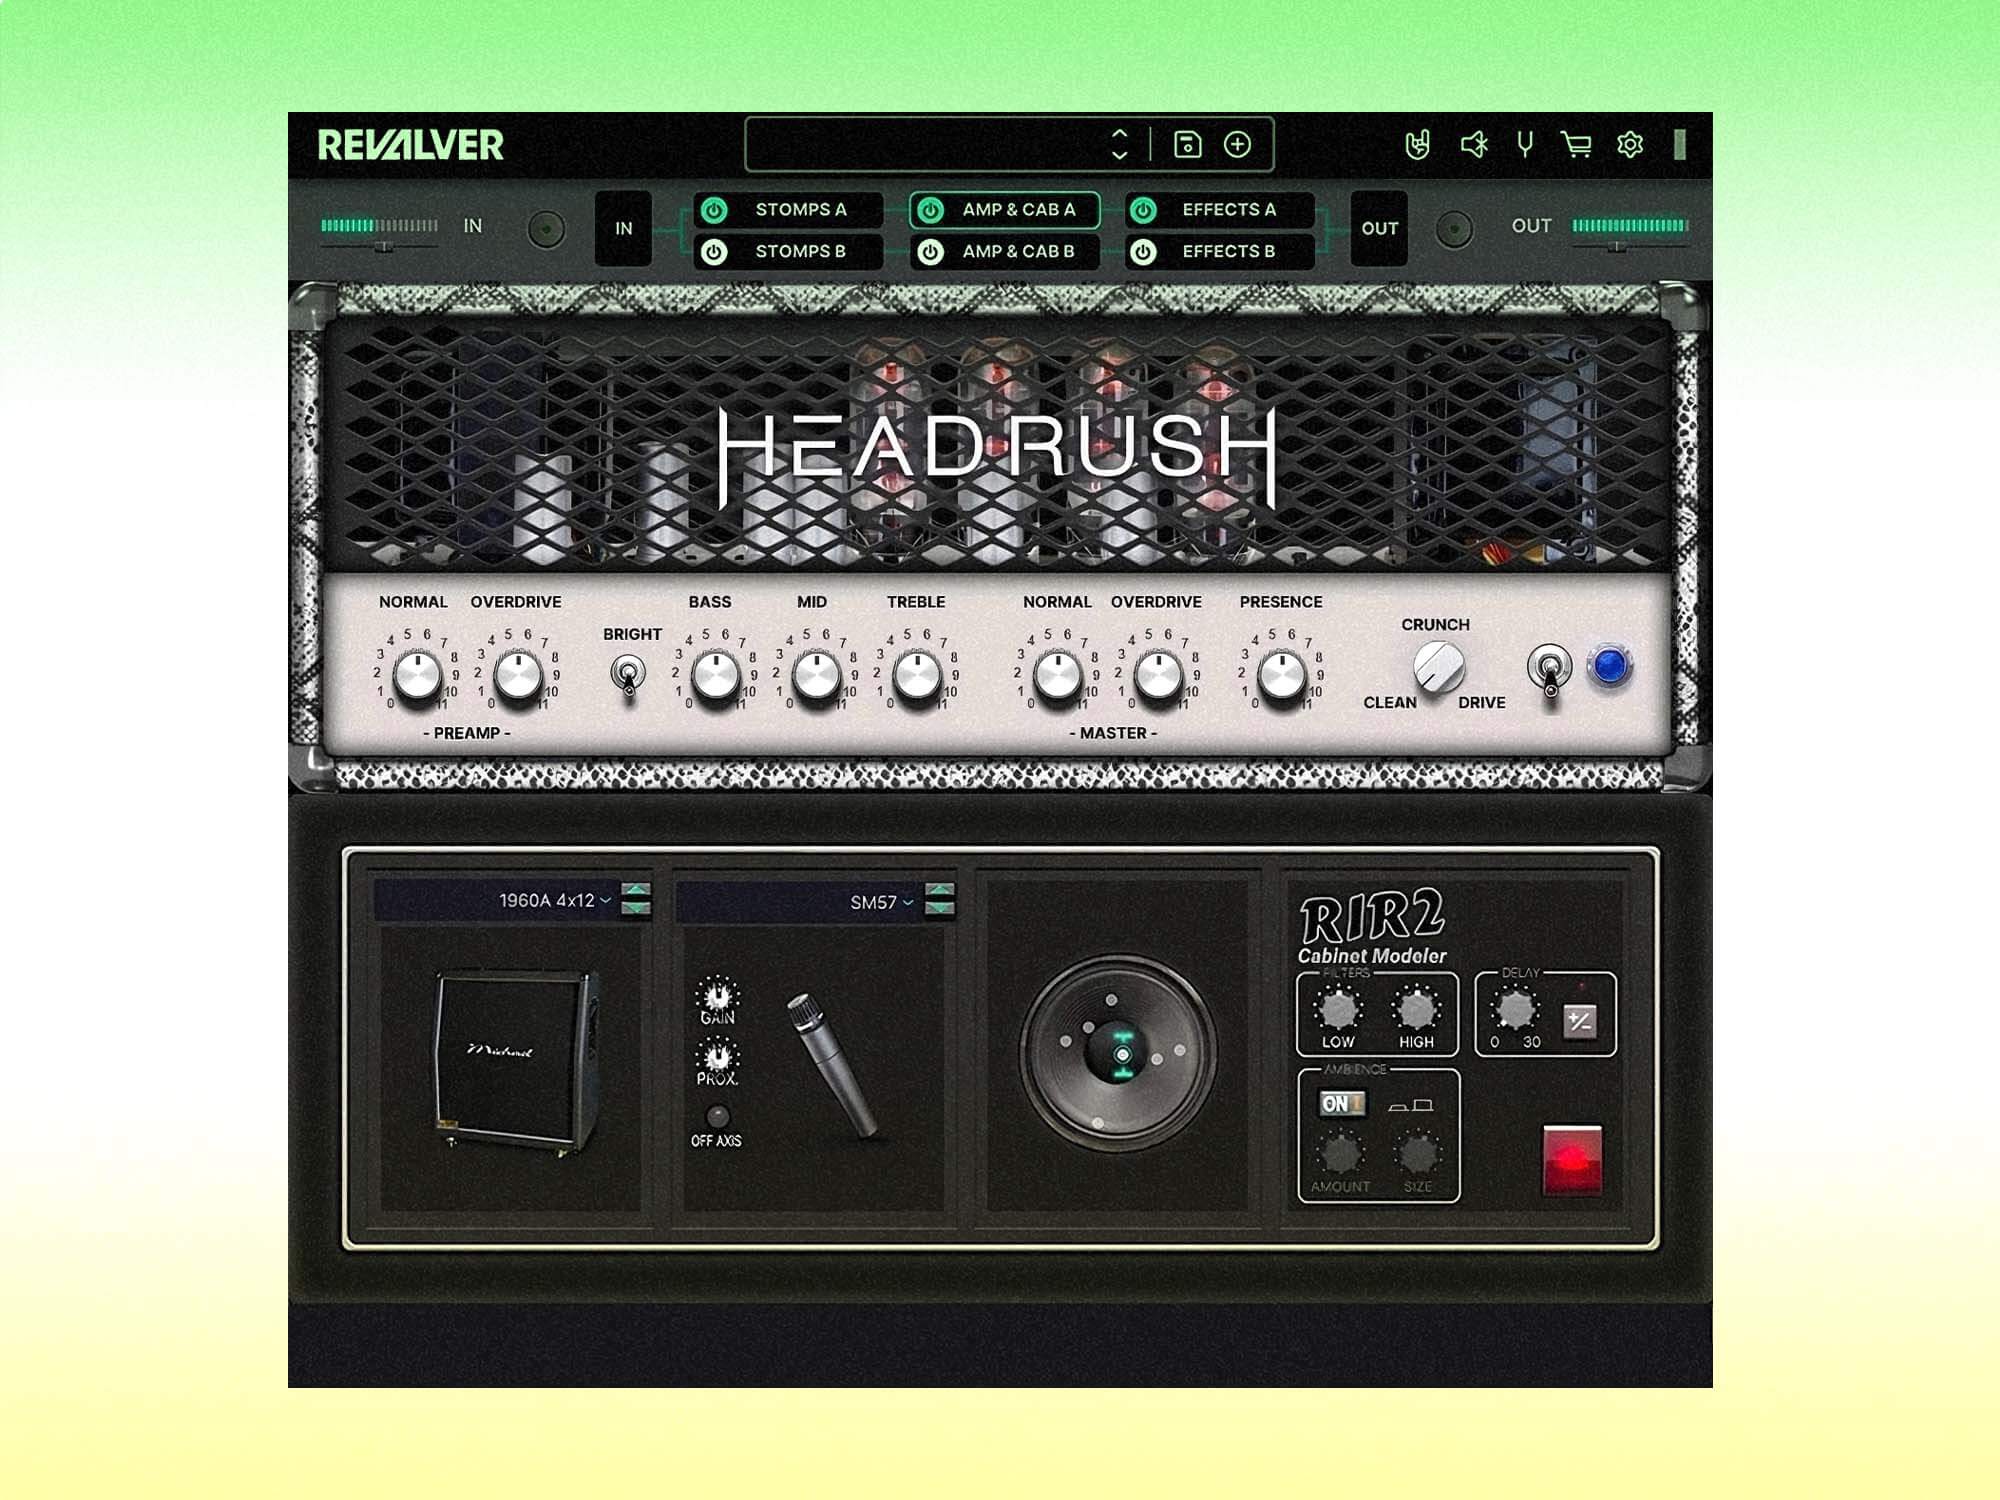 ReValver 5 in use. The image is a screenshot from the software showing a HeadRush amp and the cabinet module allowing for positioning of the mic.